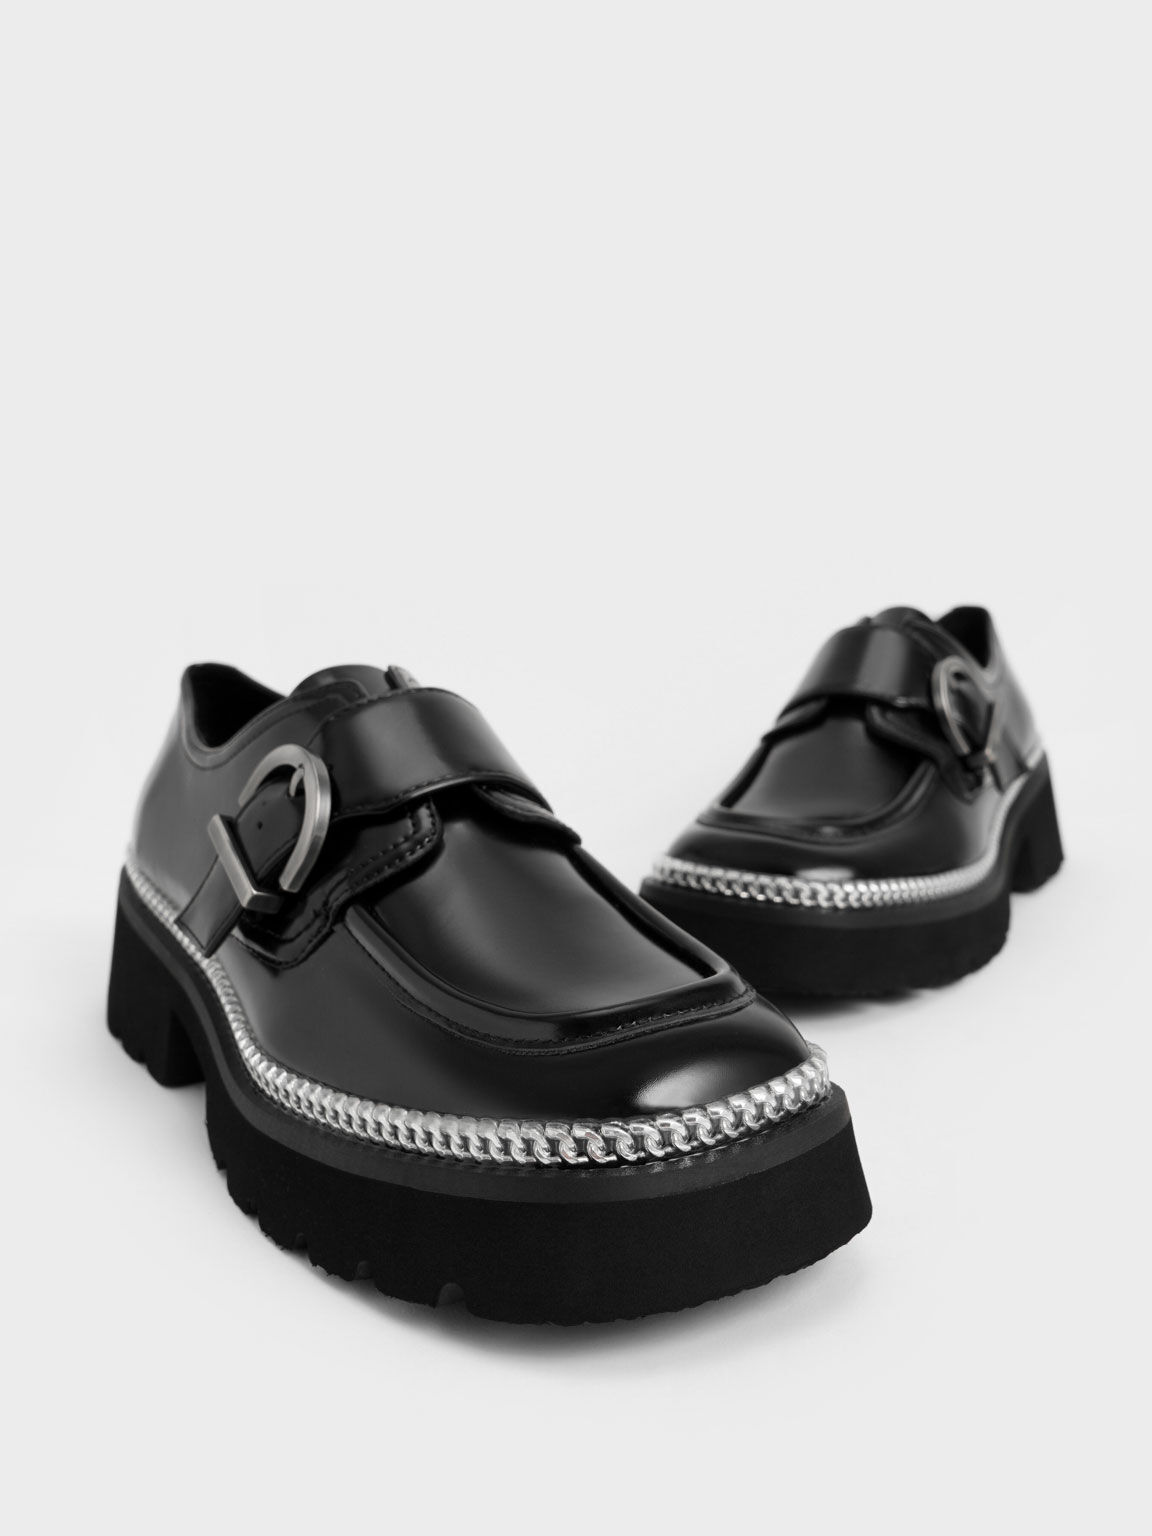 Buckled Chain-Trim Loafers, Black, hi-res